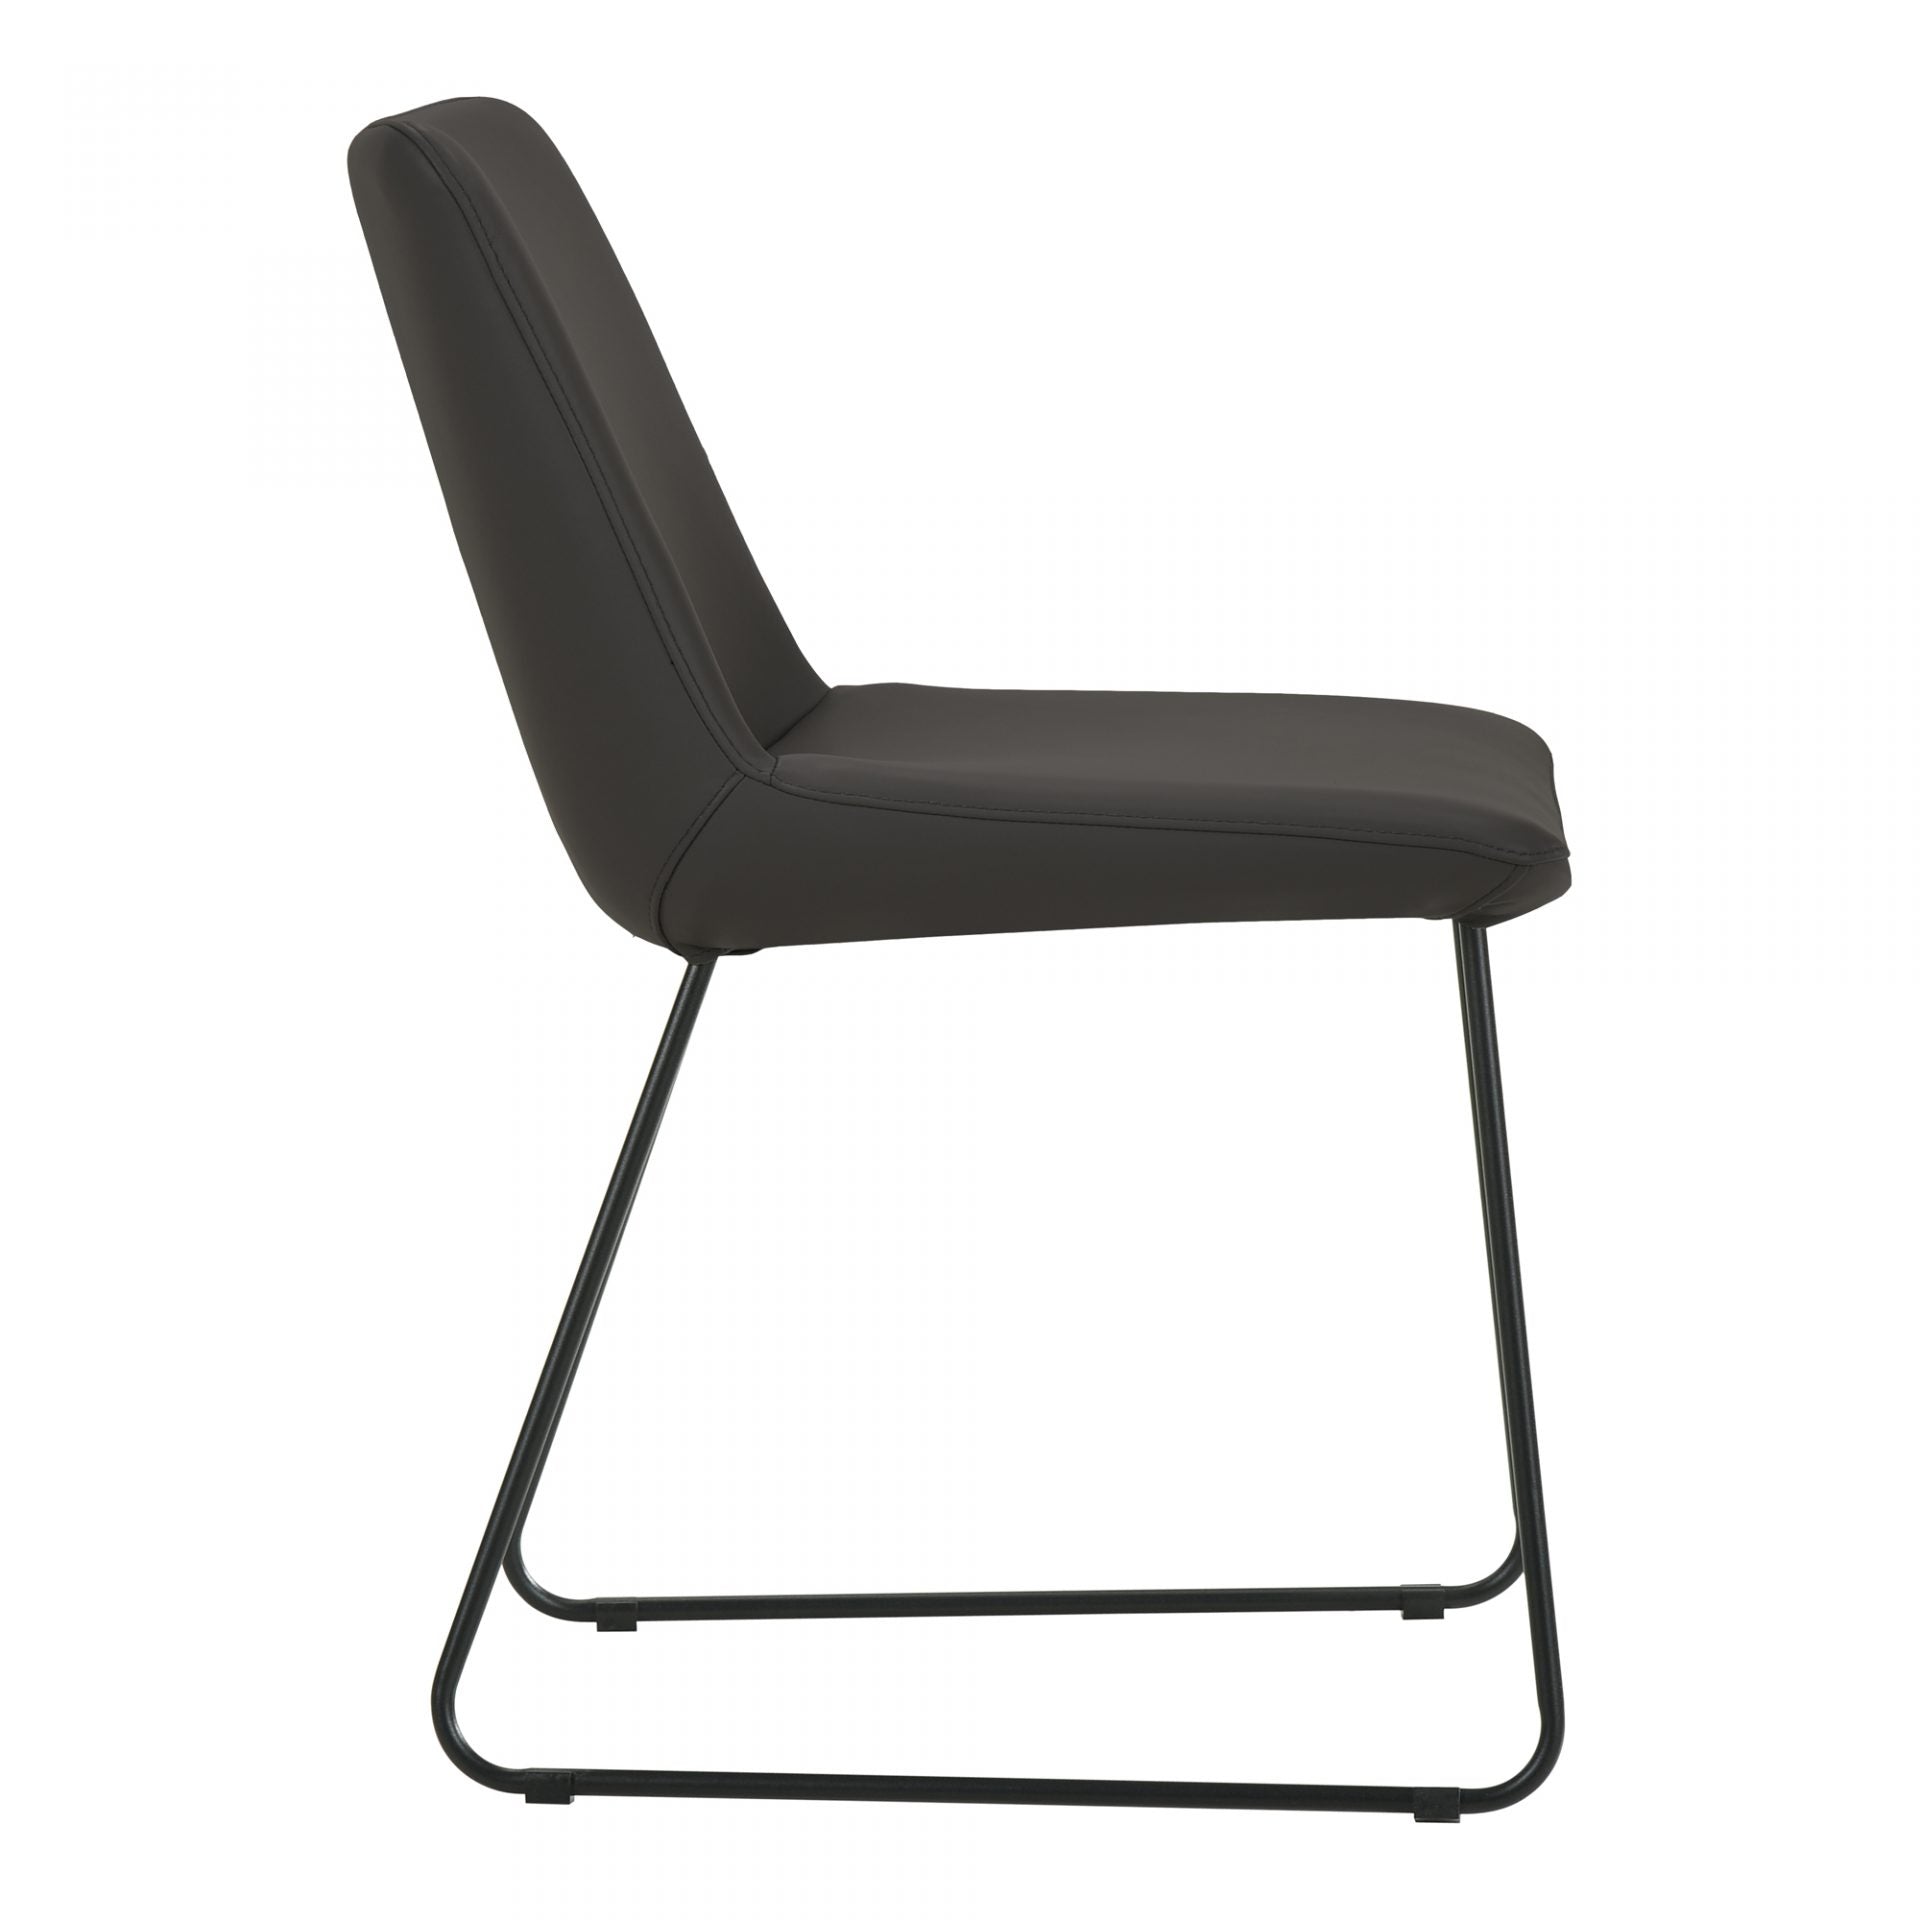 This Villa Dining Chair - Black features a confident metal and leather combo that will add an instant, on-trend industrial look to your modern home. Set upon a slim, metal frame, paired with beautiful leather upholstery, this contemporary design is sure to level up your dining arrangement.  Size: 19"W x 23"D x 21"H